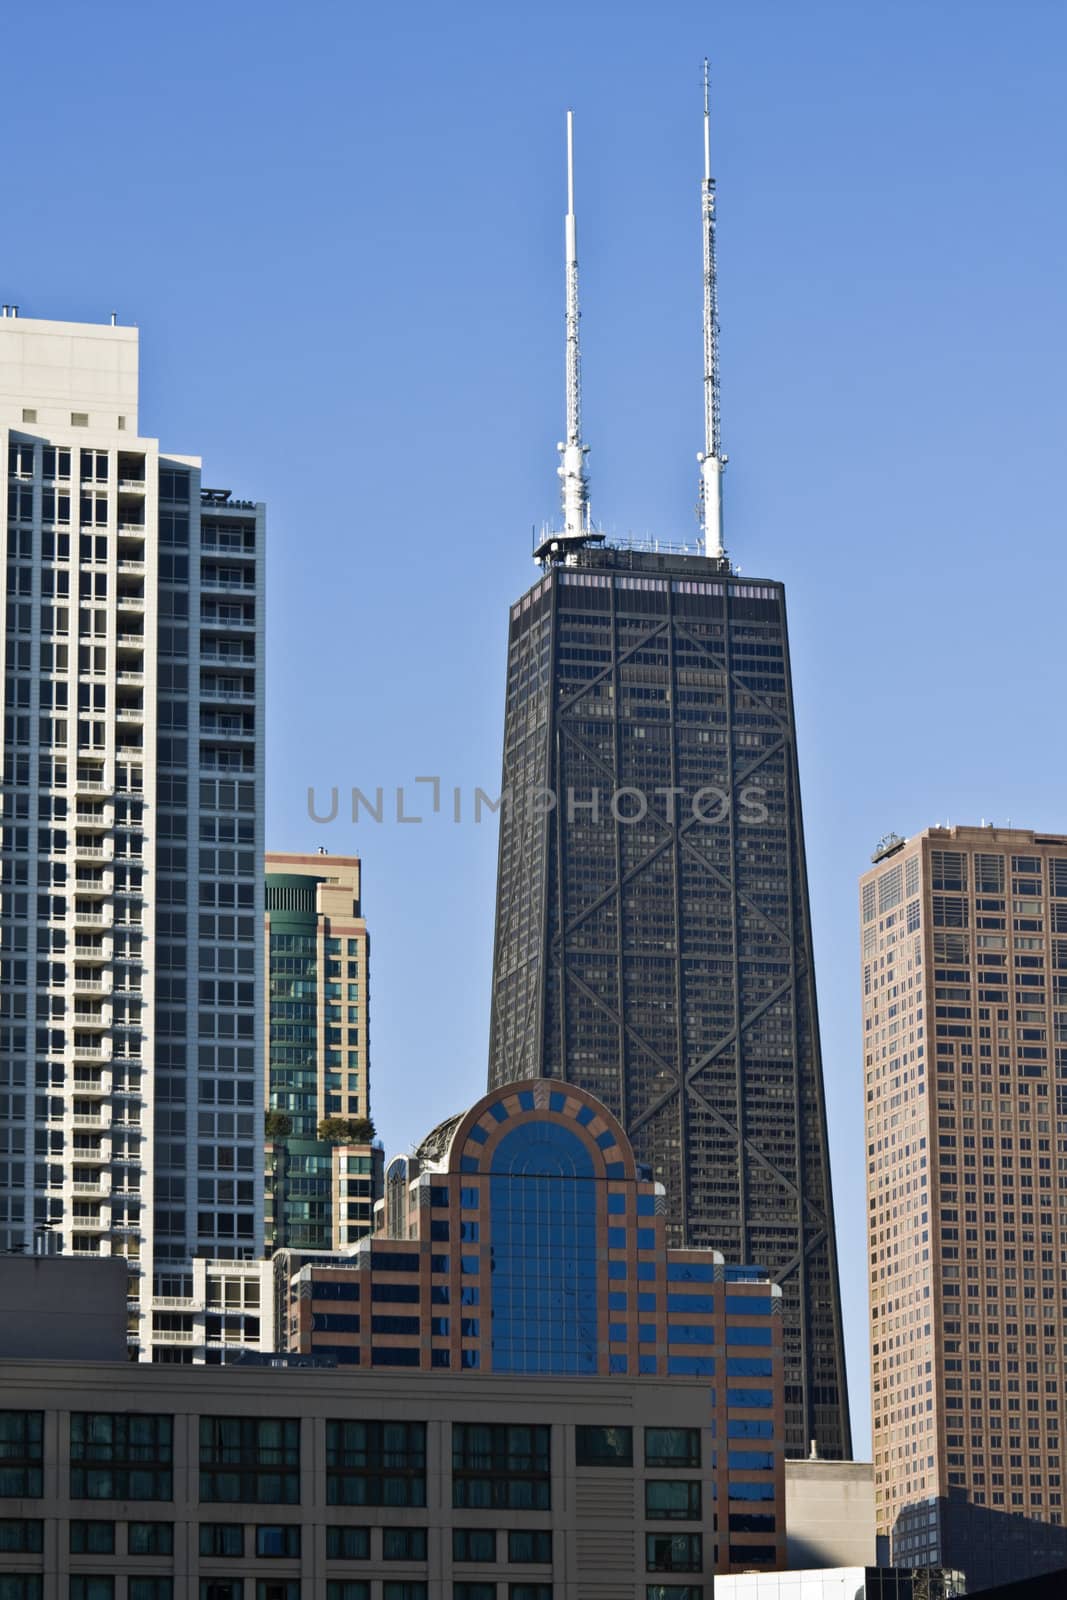 Hancock betweetn other buildings - Chicago, IL.